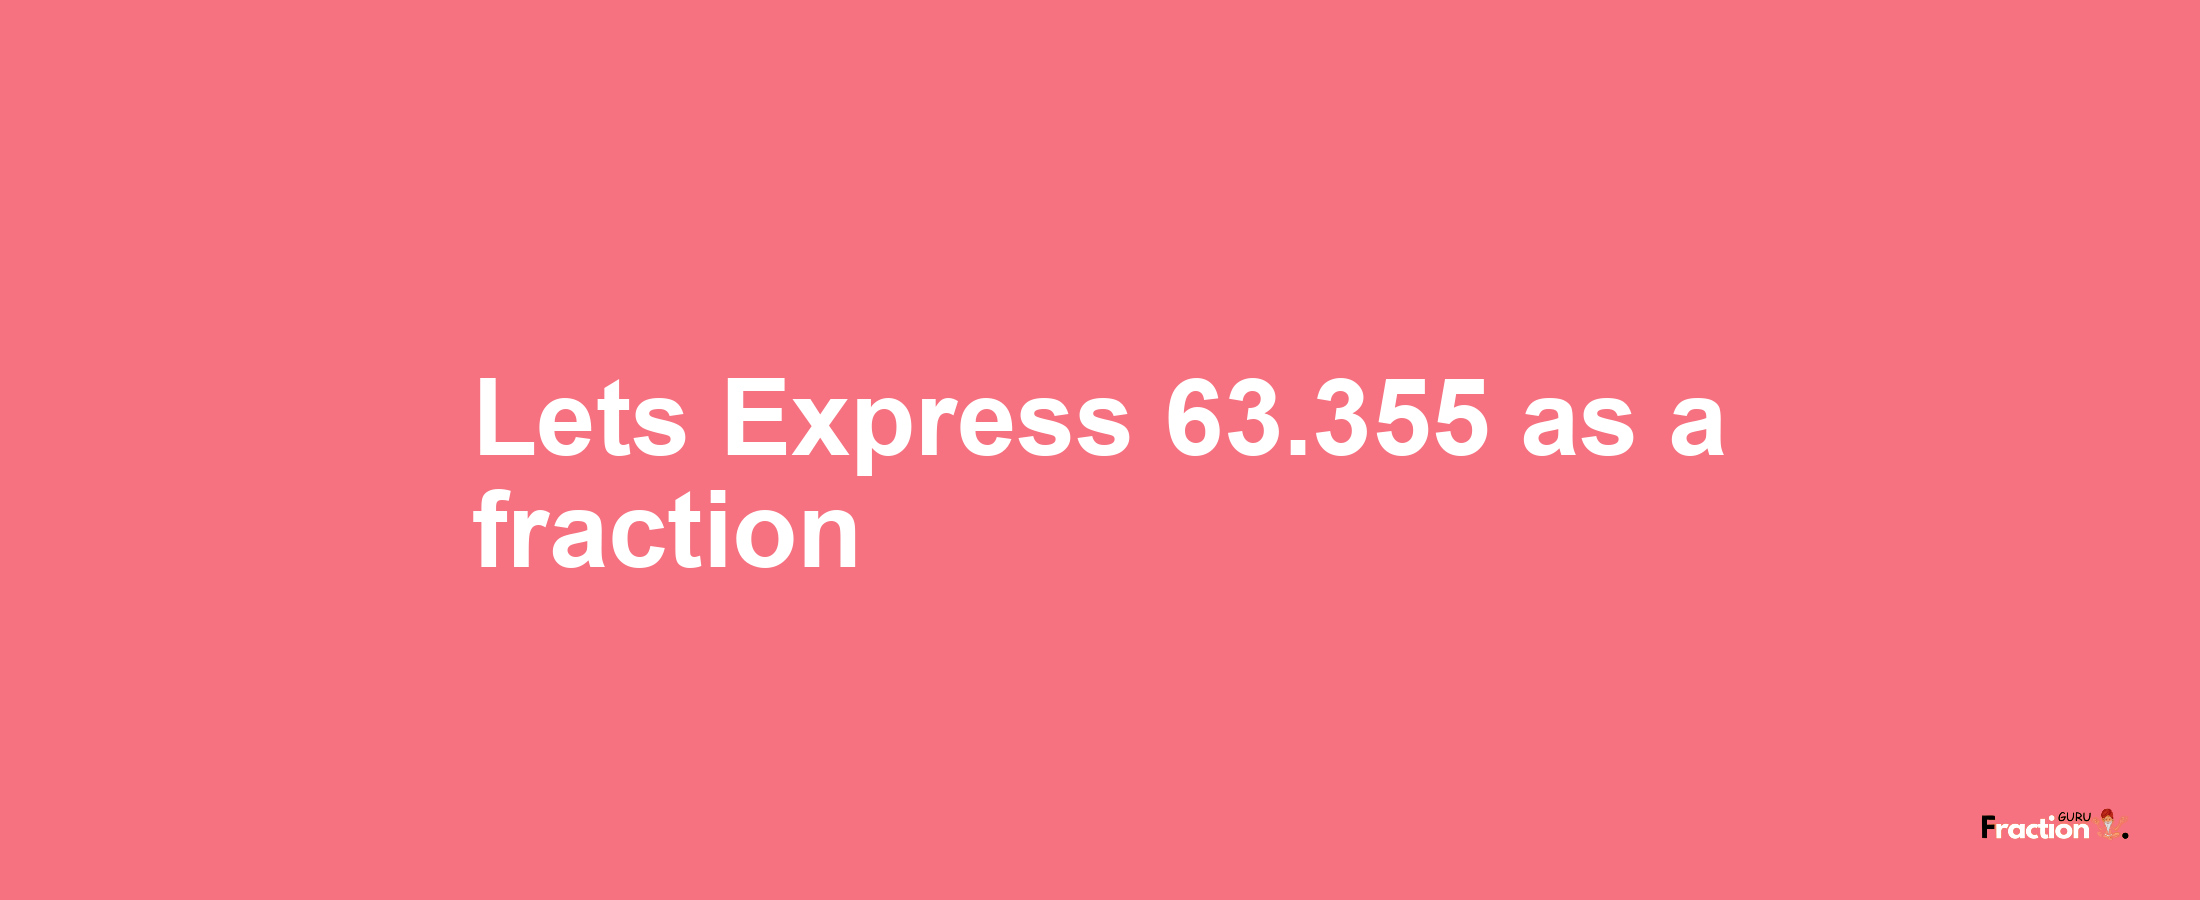 Lets Express 63.355 as afraction